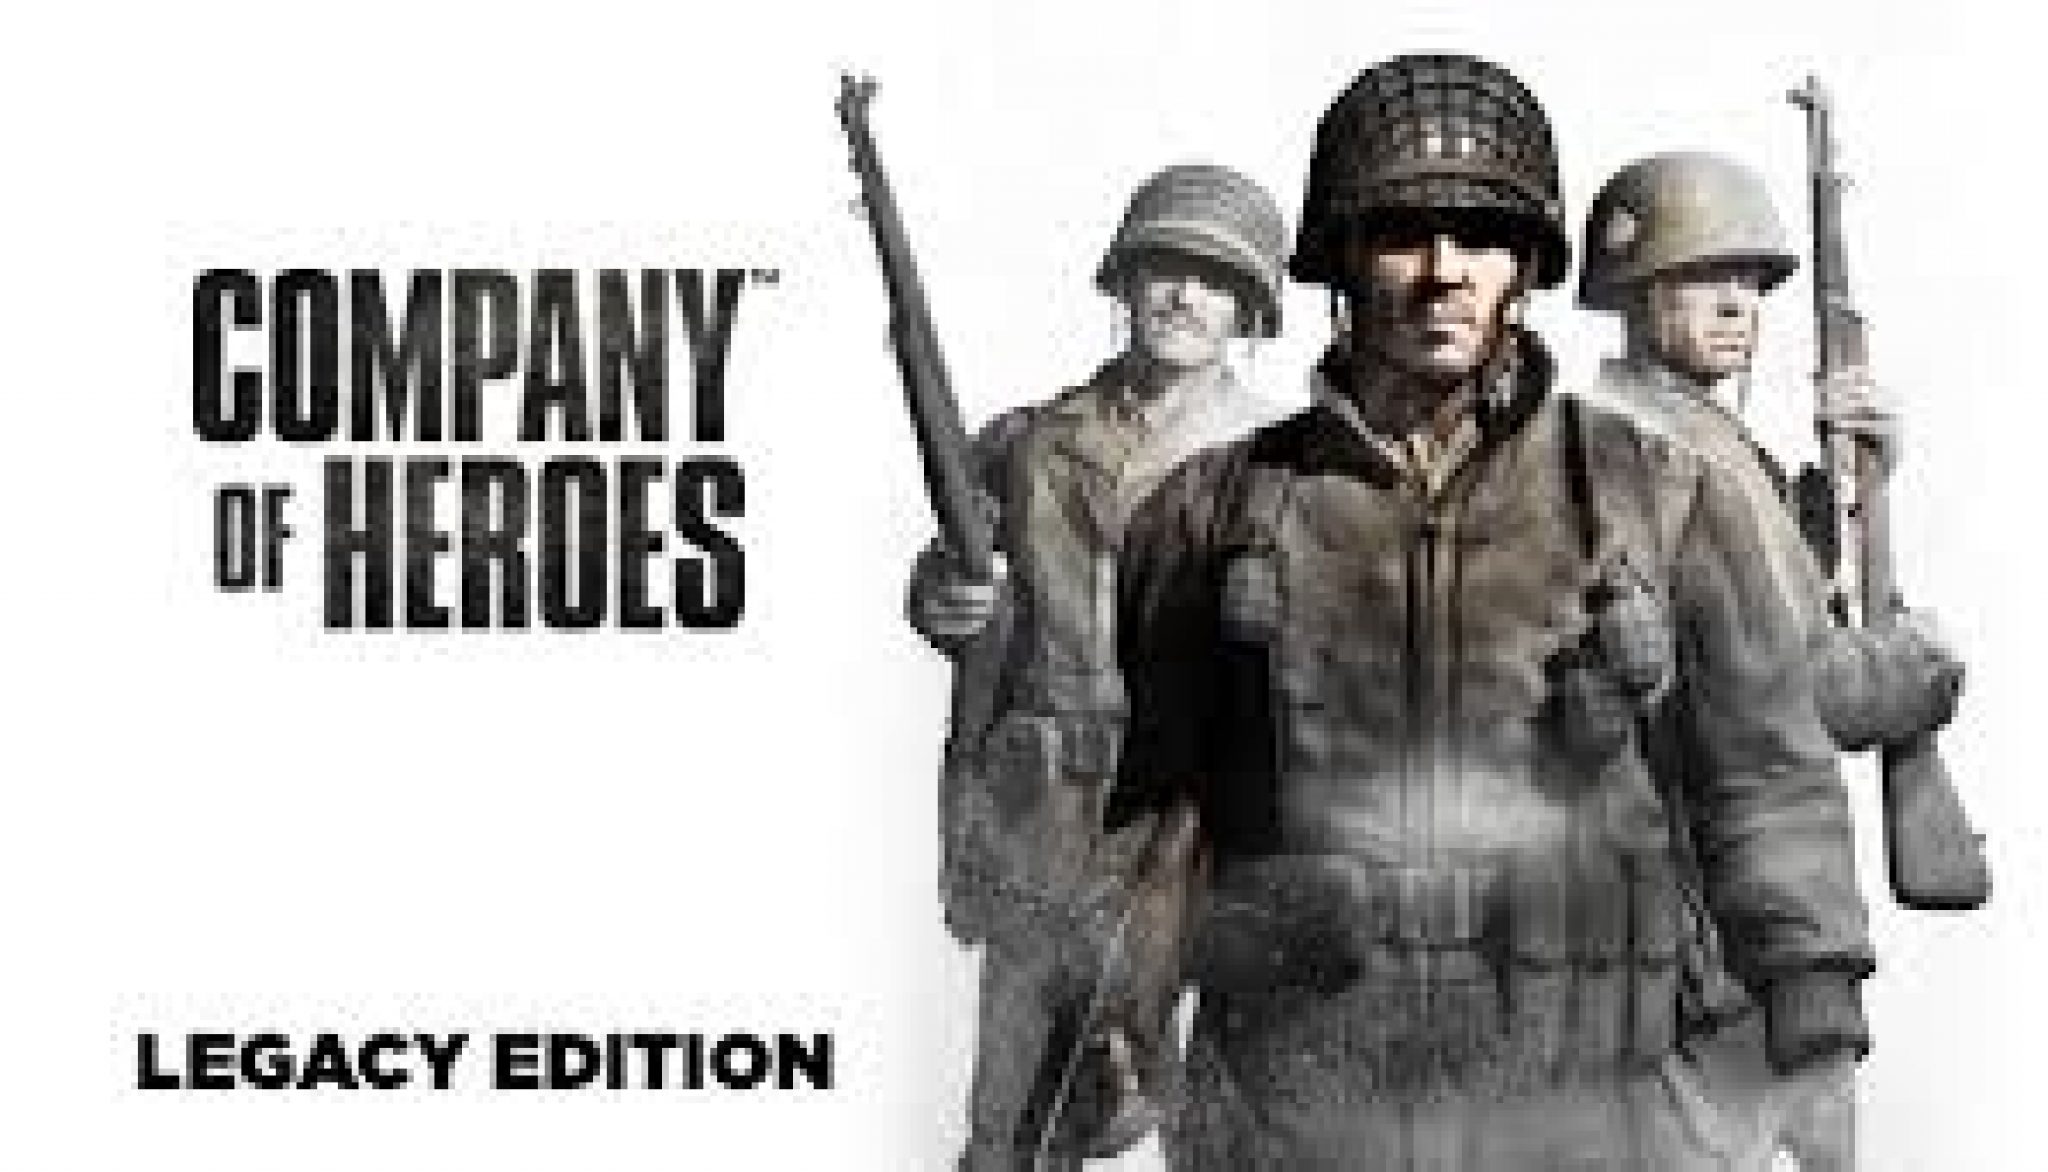 company of heroes 1 no commentary